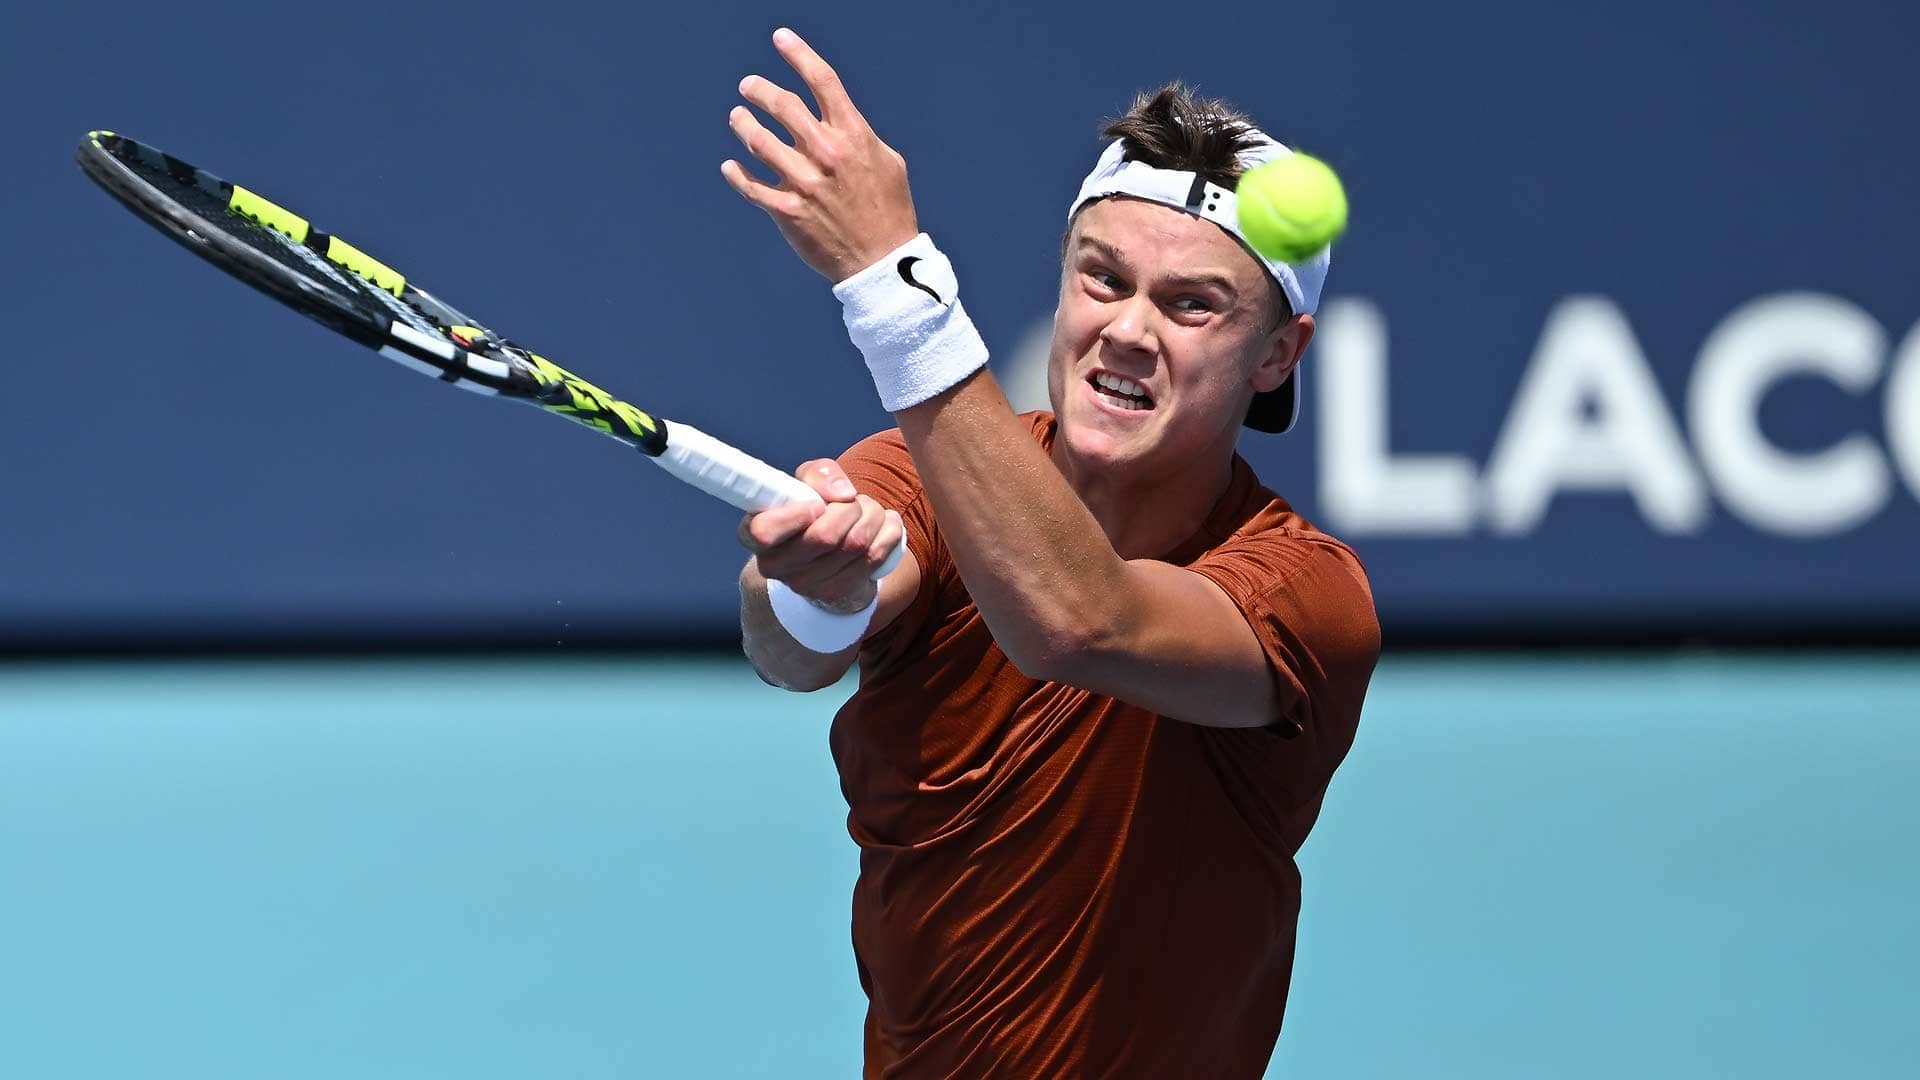 Holger Rune defeats Diego Schwartzman to reach the fourth round on debut at the Miami Open presented by Itau.